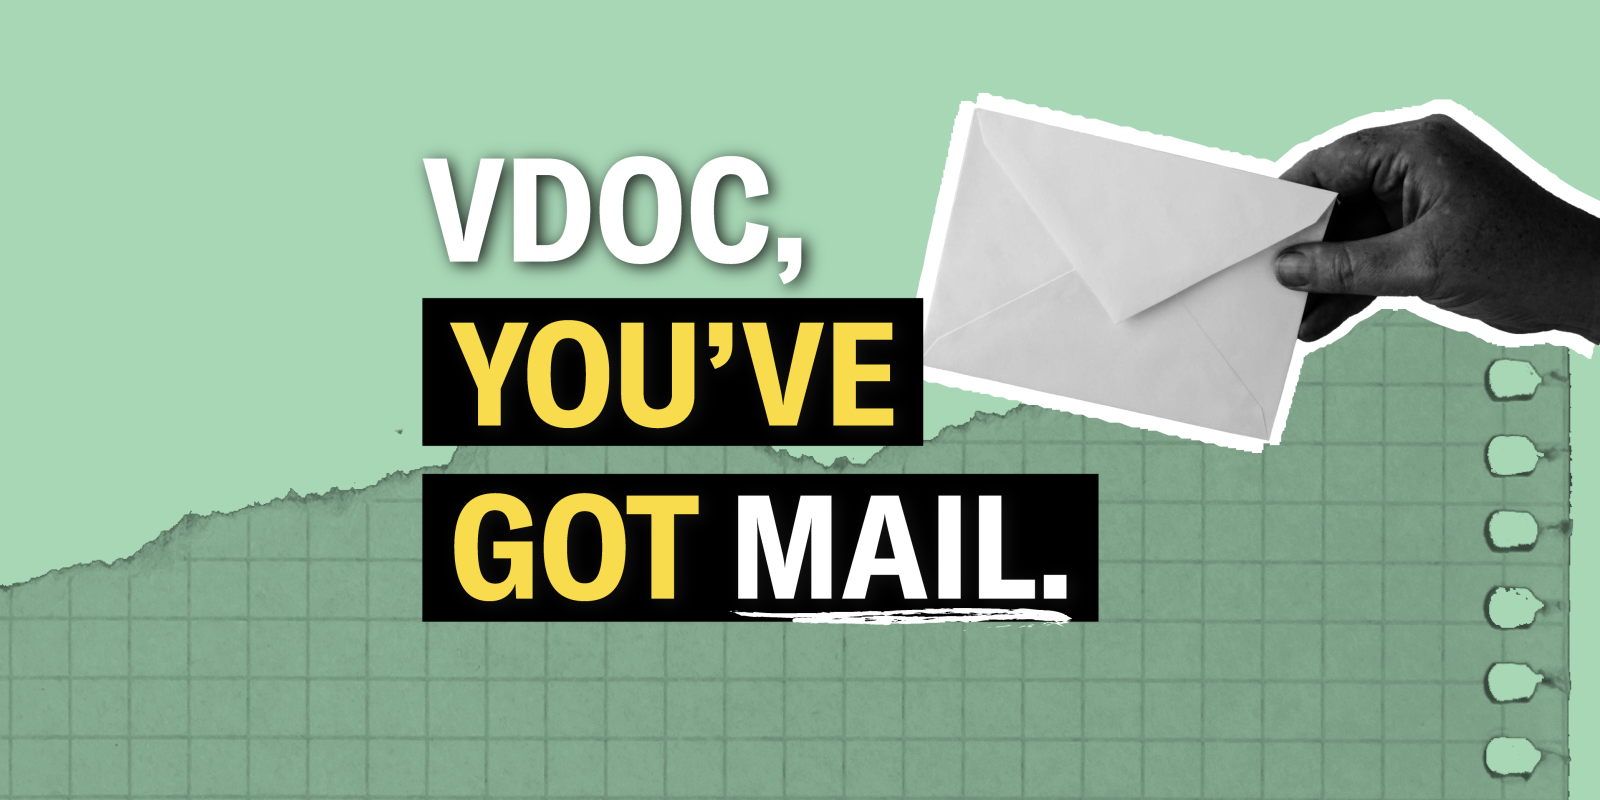 Text says: "VDOC you've got mail." In the right hand side is a hand with an envelope. 